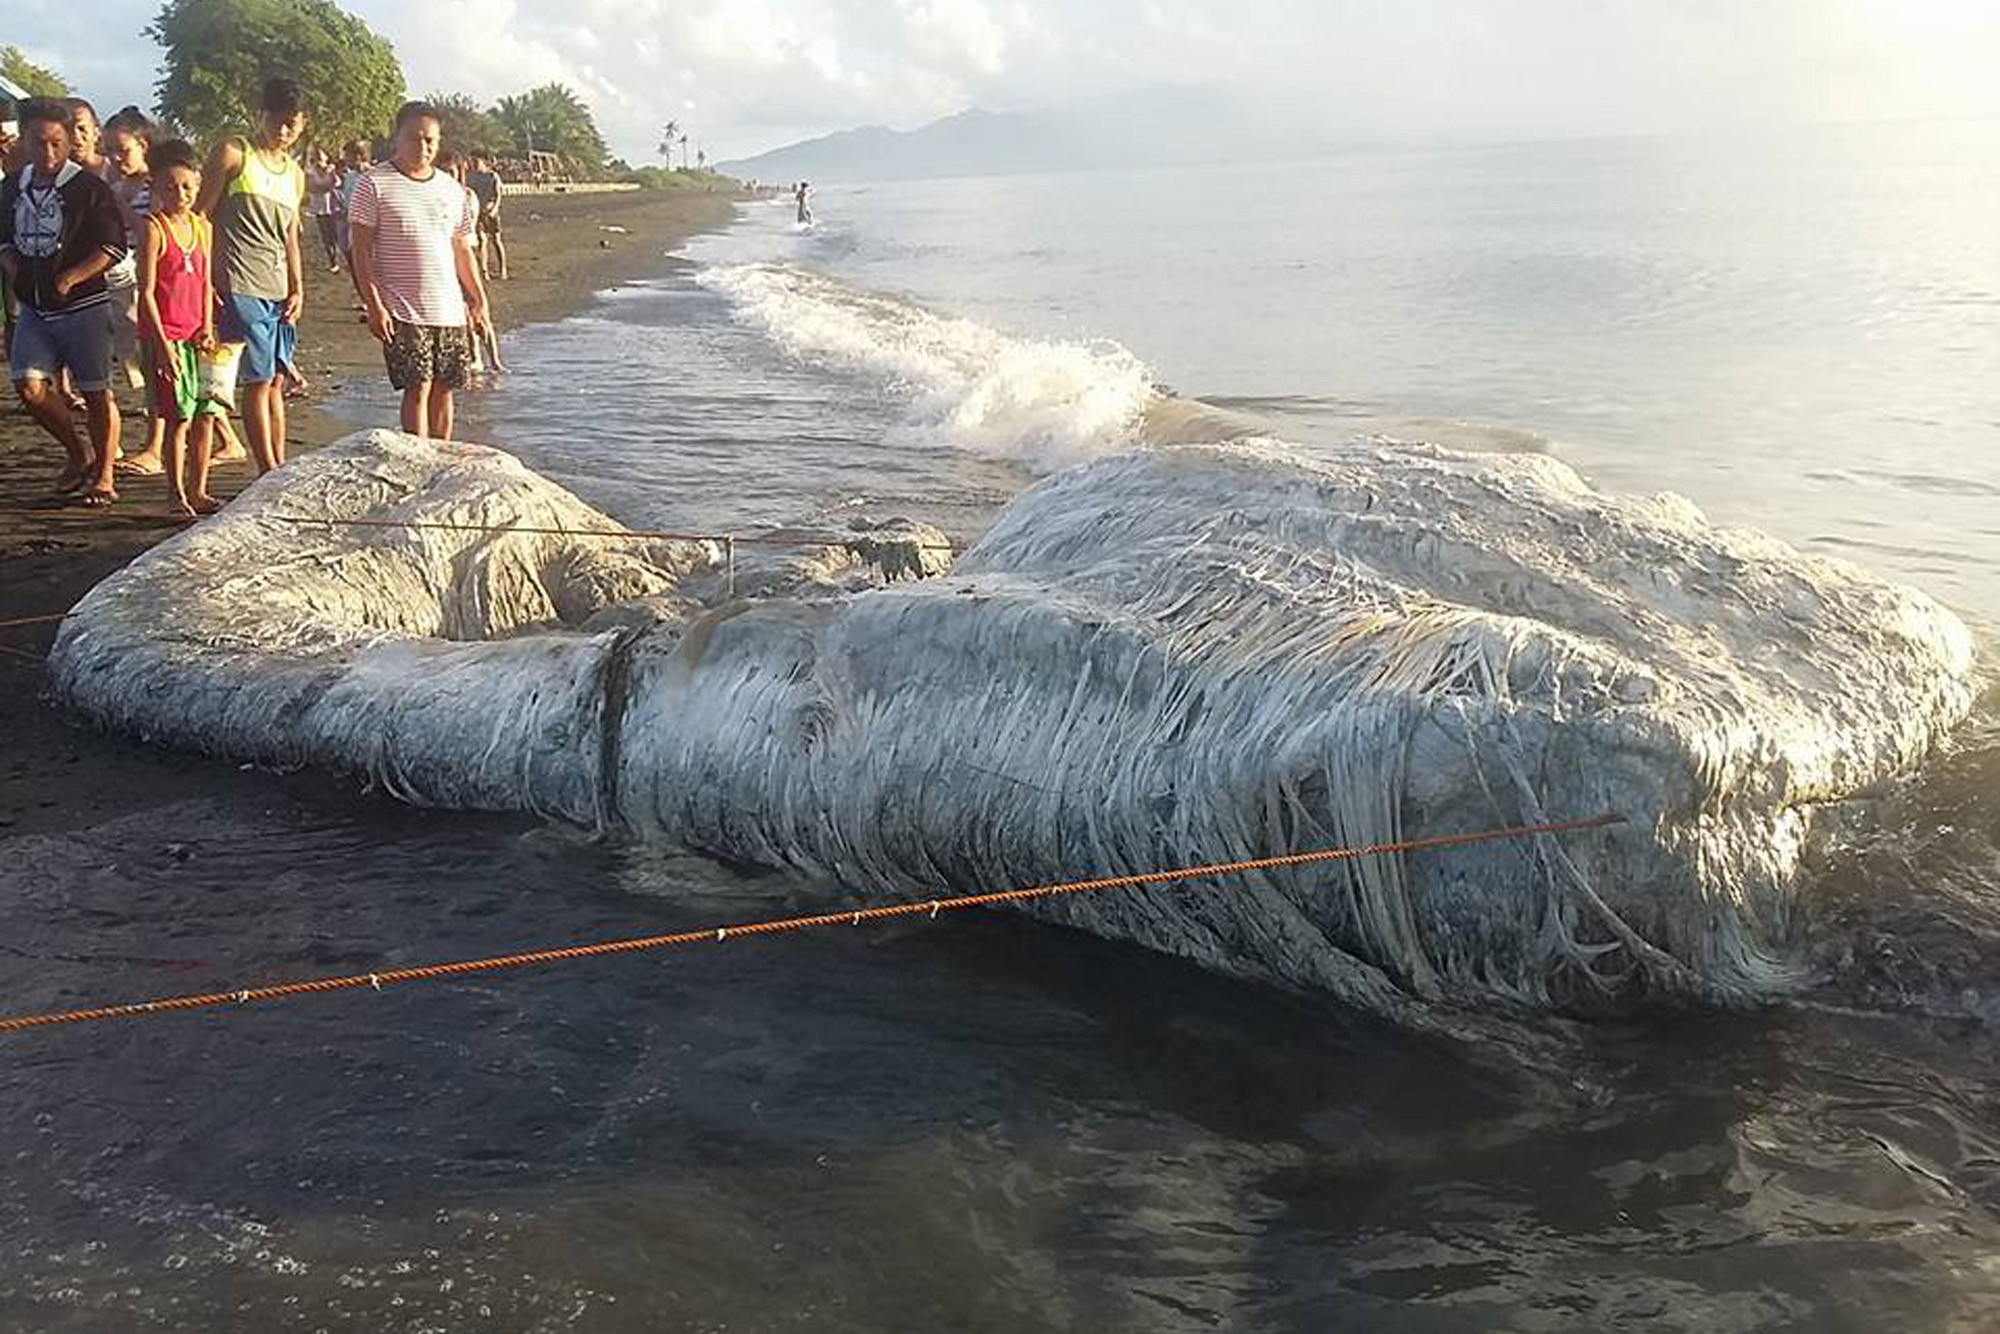 Villagers believe this mystery sea creature is a very bad sign